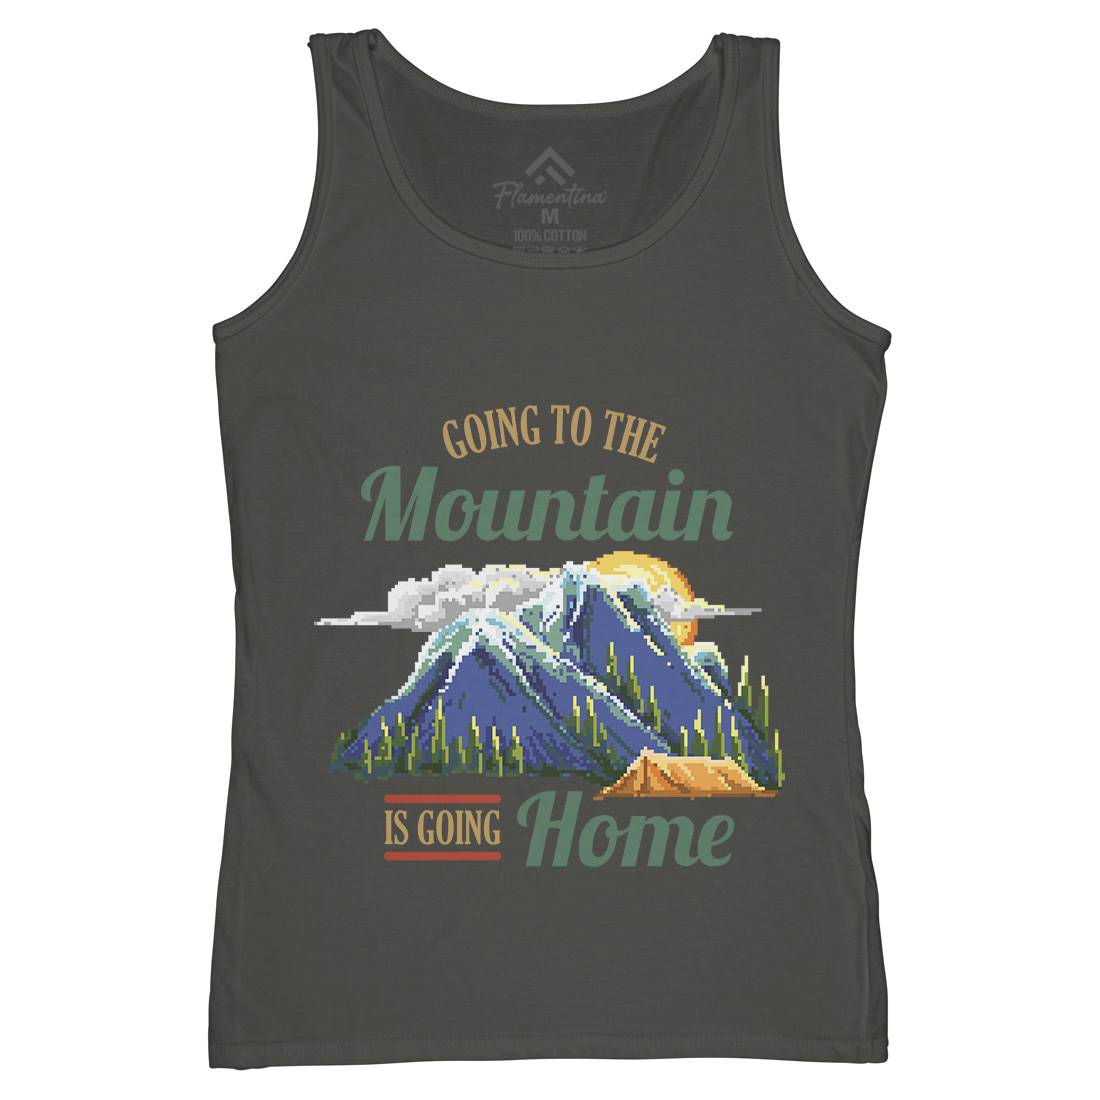 Going To The Mountain Womens Organic Tank Top Vest Nature B905